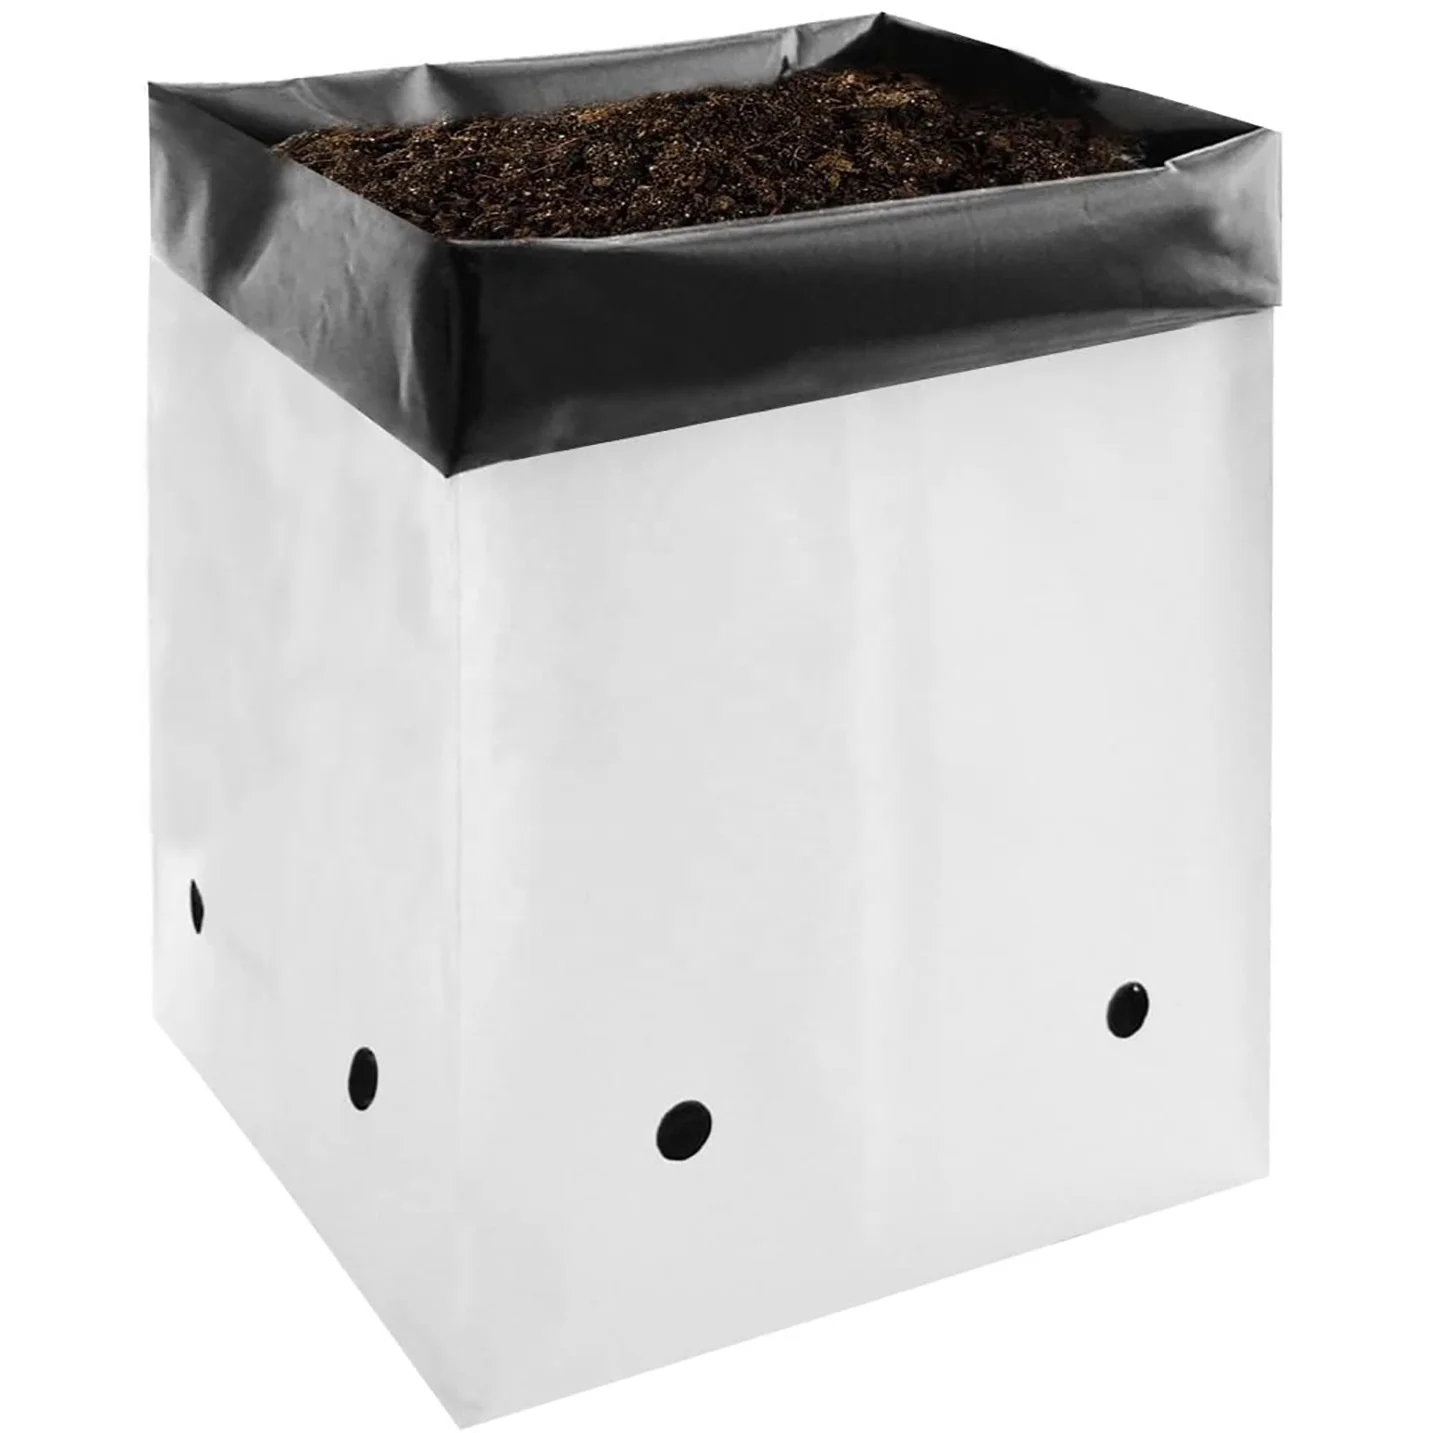 Black and White plastic plant grow bag for Potting Up Seedlings and Rooting